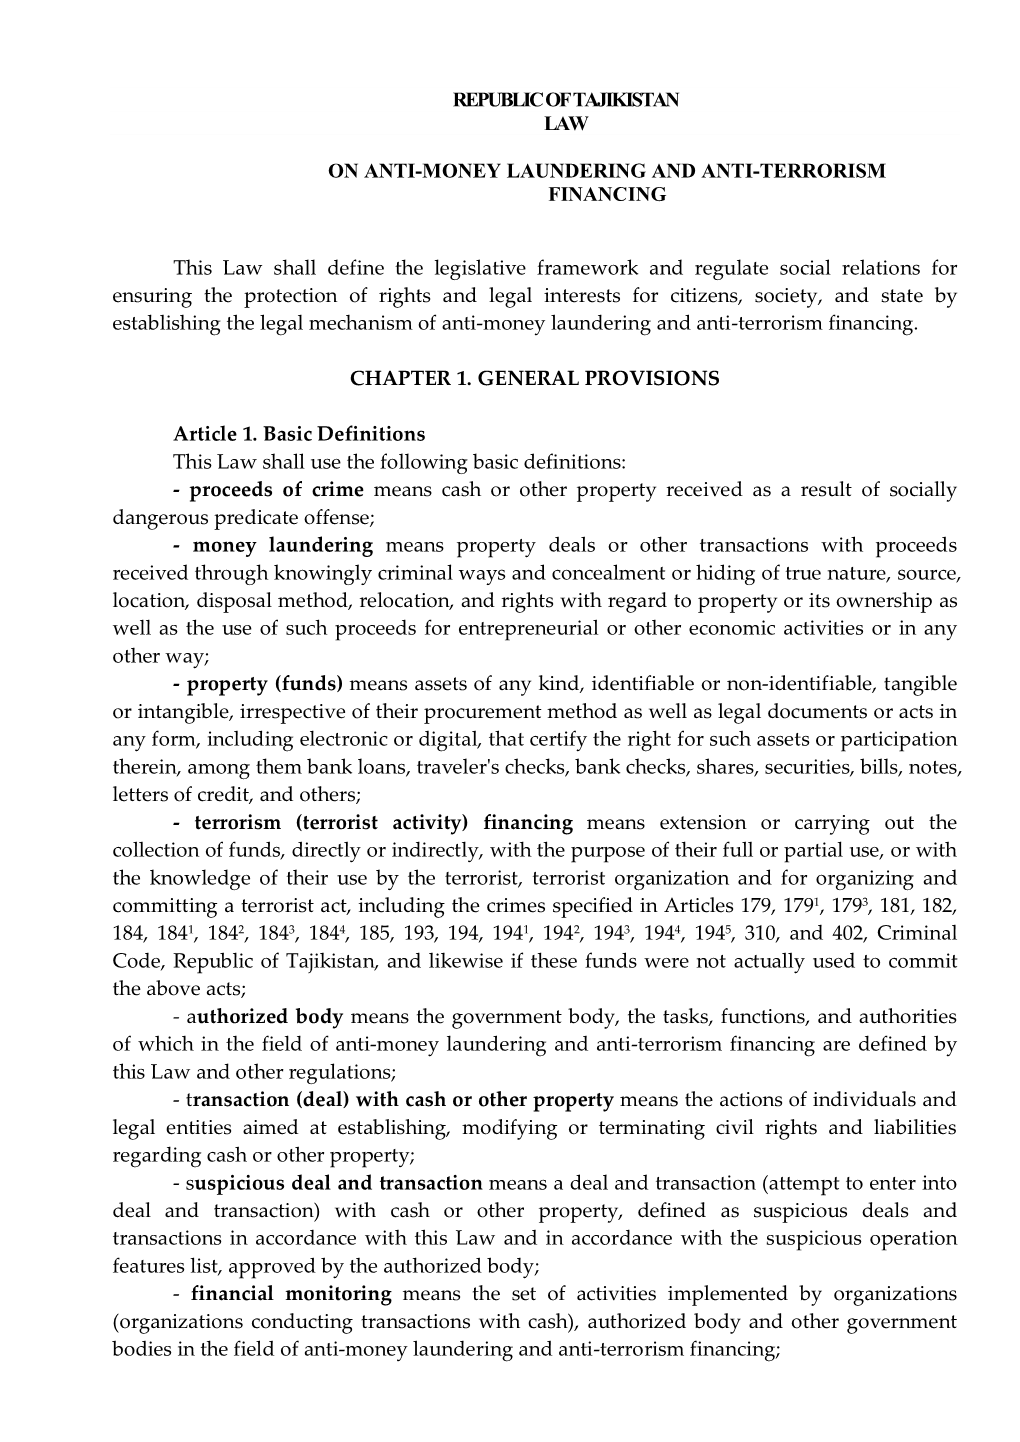 Law on Anti-Money Laundering and Anti-Terrorism Financing